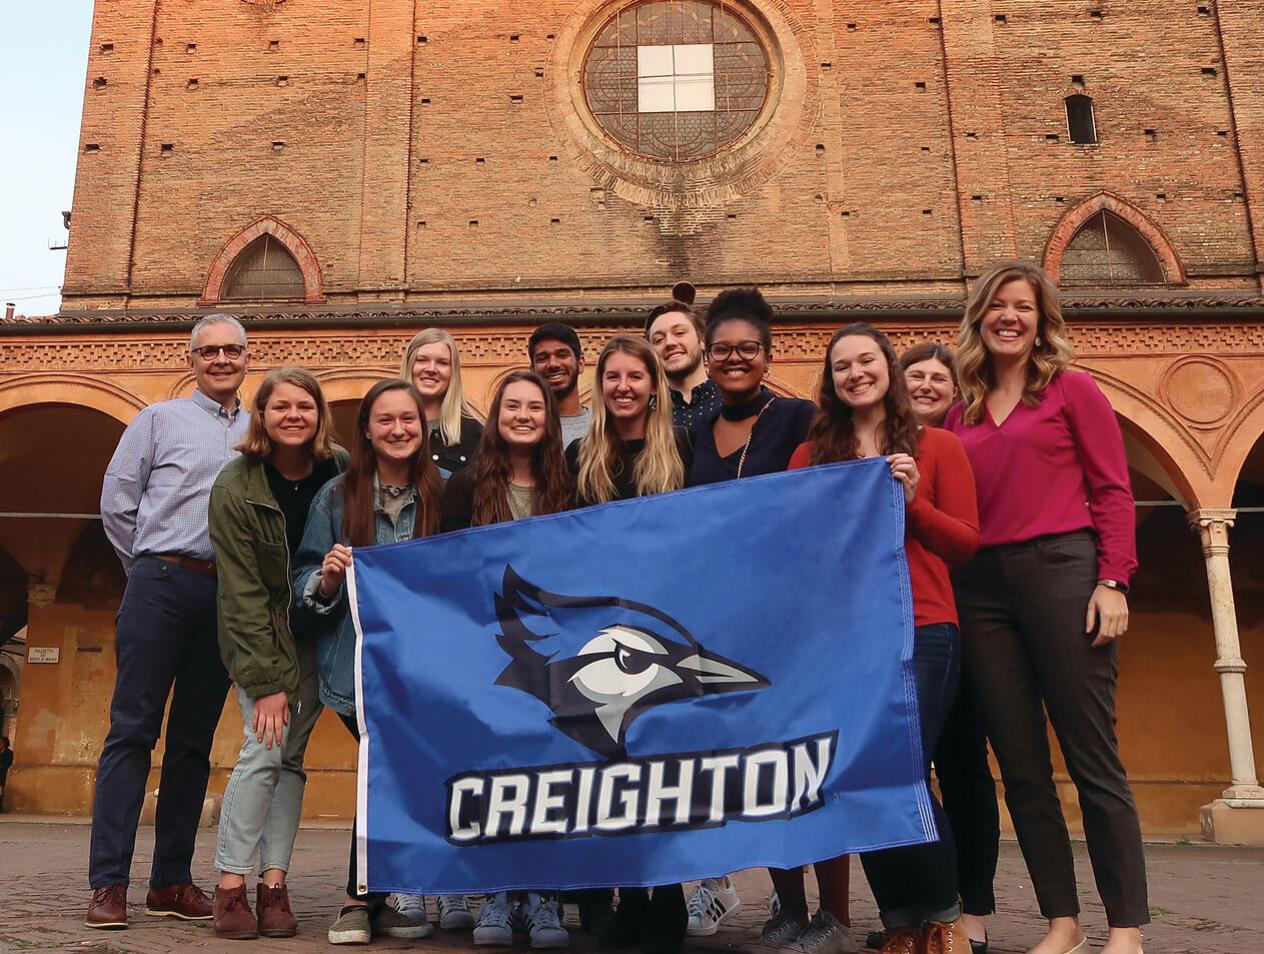 A group of Creighton students pose with a Creighton flag on an international trip